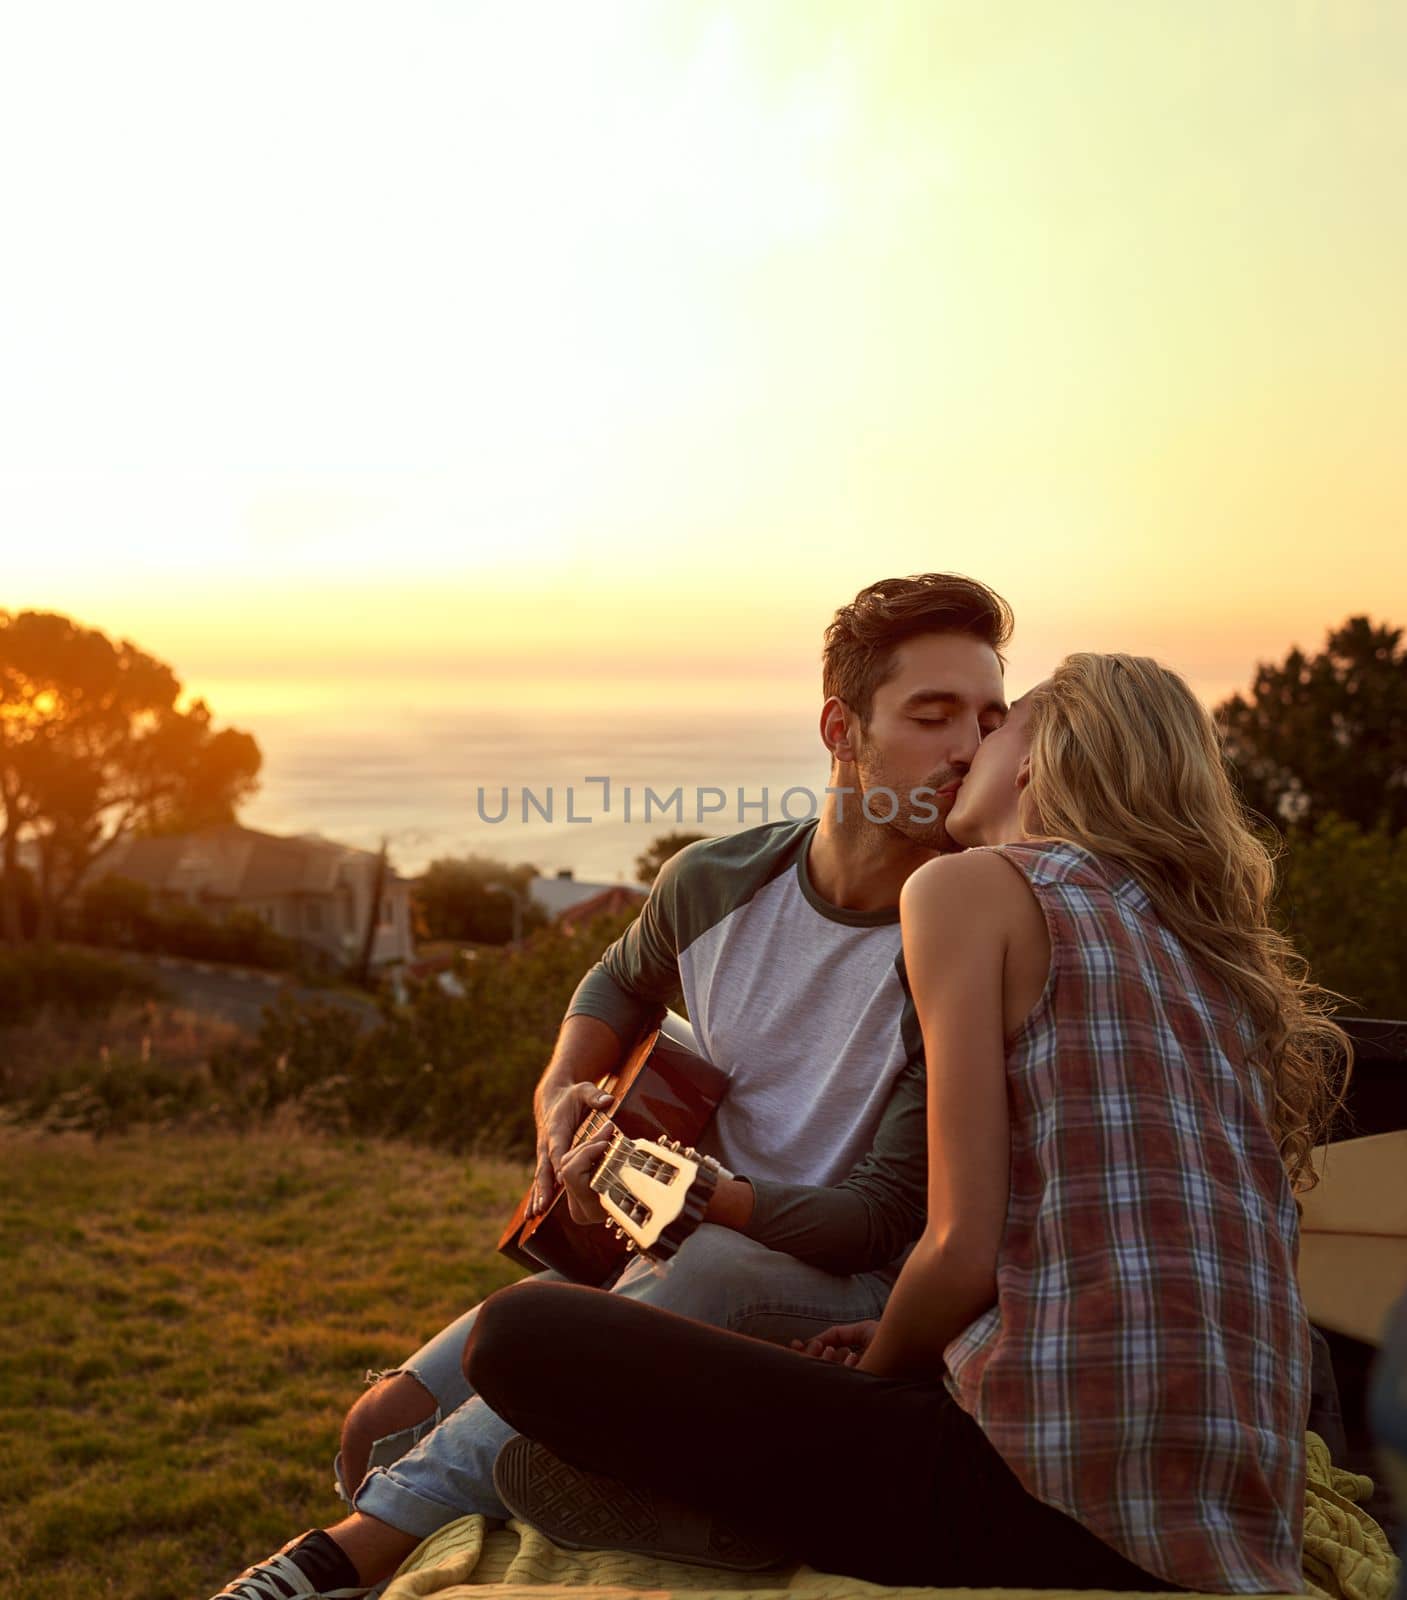 Out on a romantic roadtrip. a young man playing guitar for his girlfriend on a roadtrip